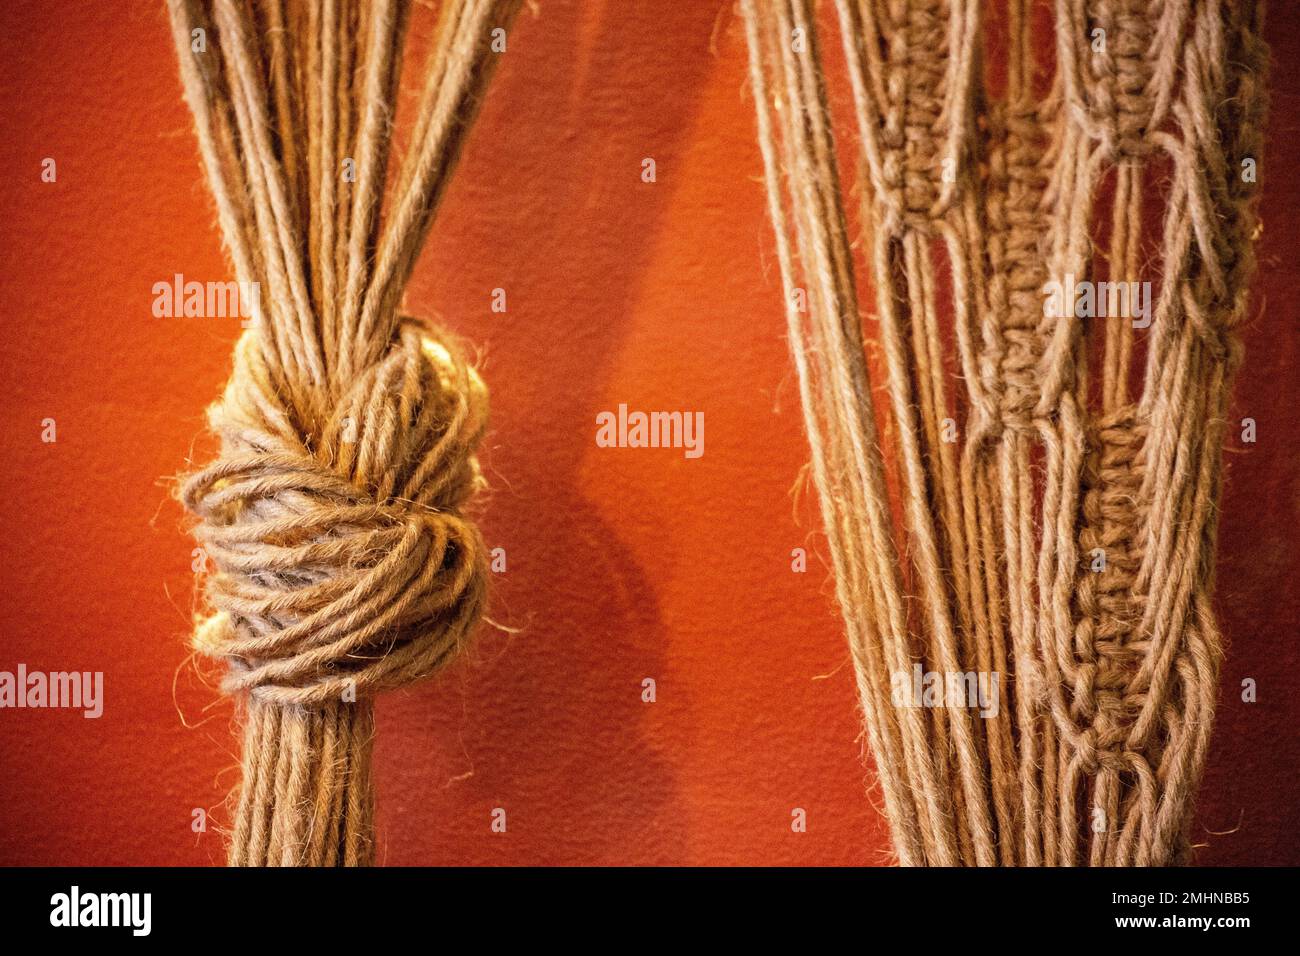 Ropes texture used as window awnings Stock Photo